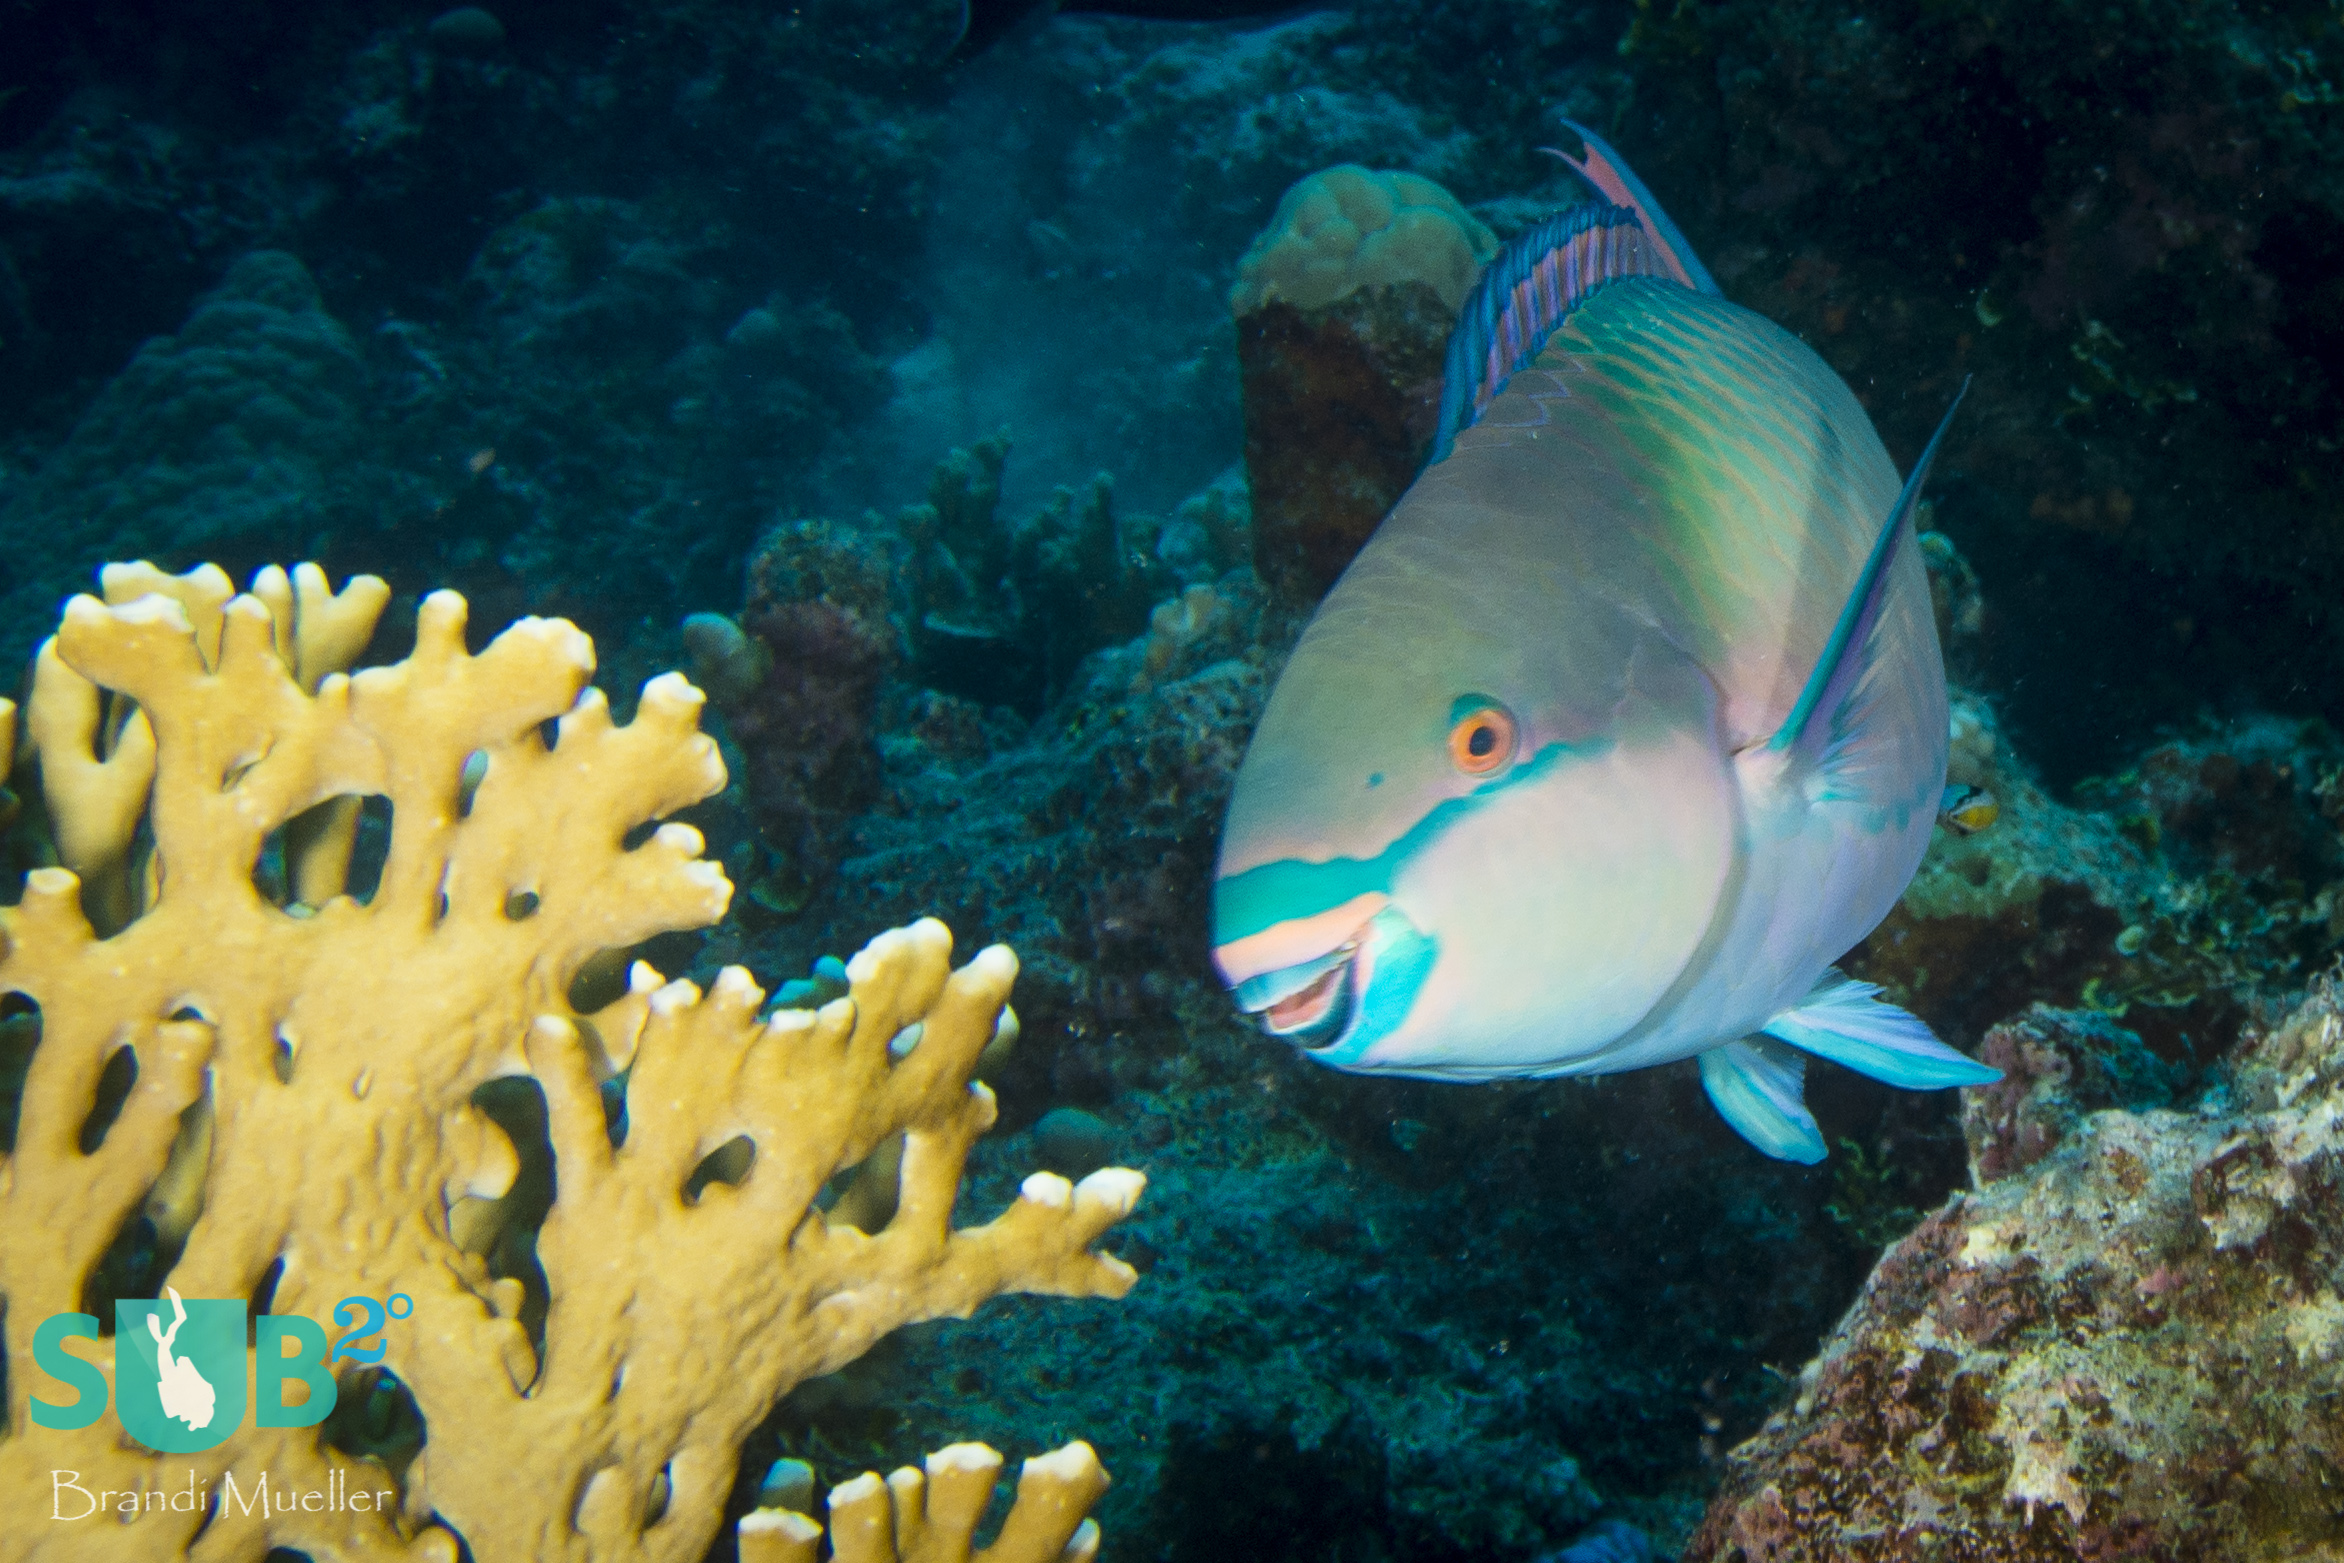 This parrotfish was about to take a bite of the coral, although parrotfish do not eat the coral for nutrition.  They feed on the algae that is growing on the coral.